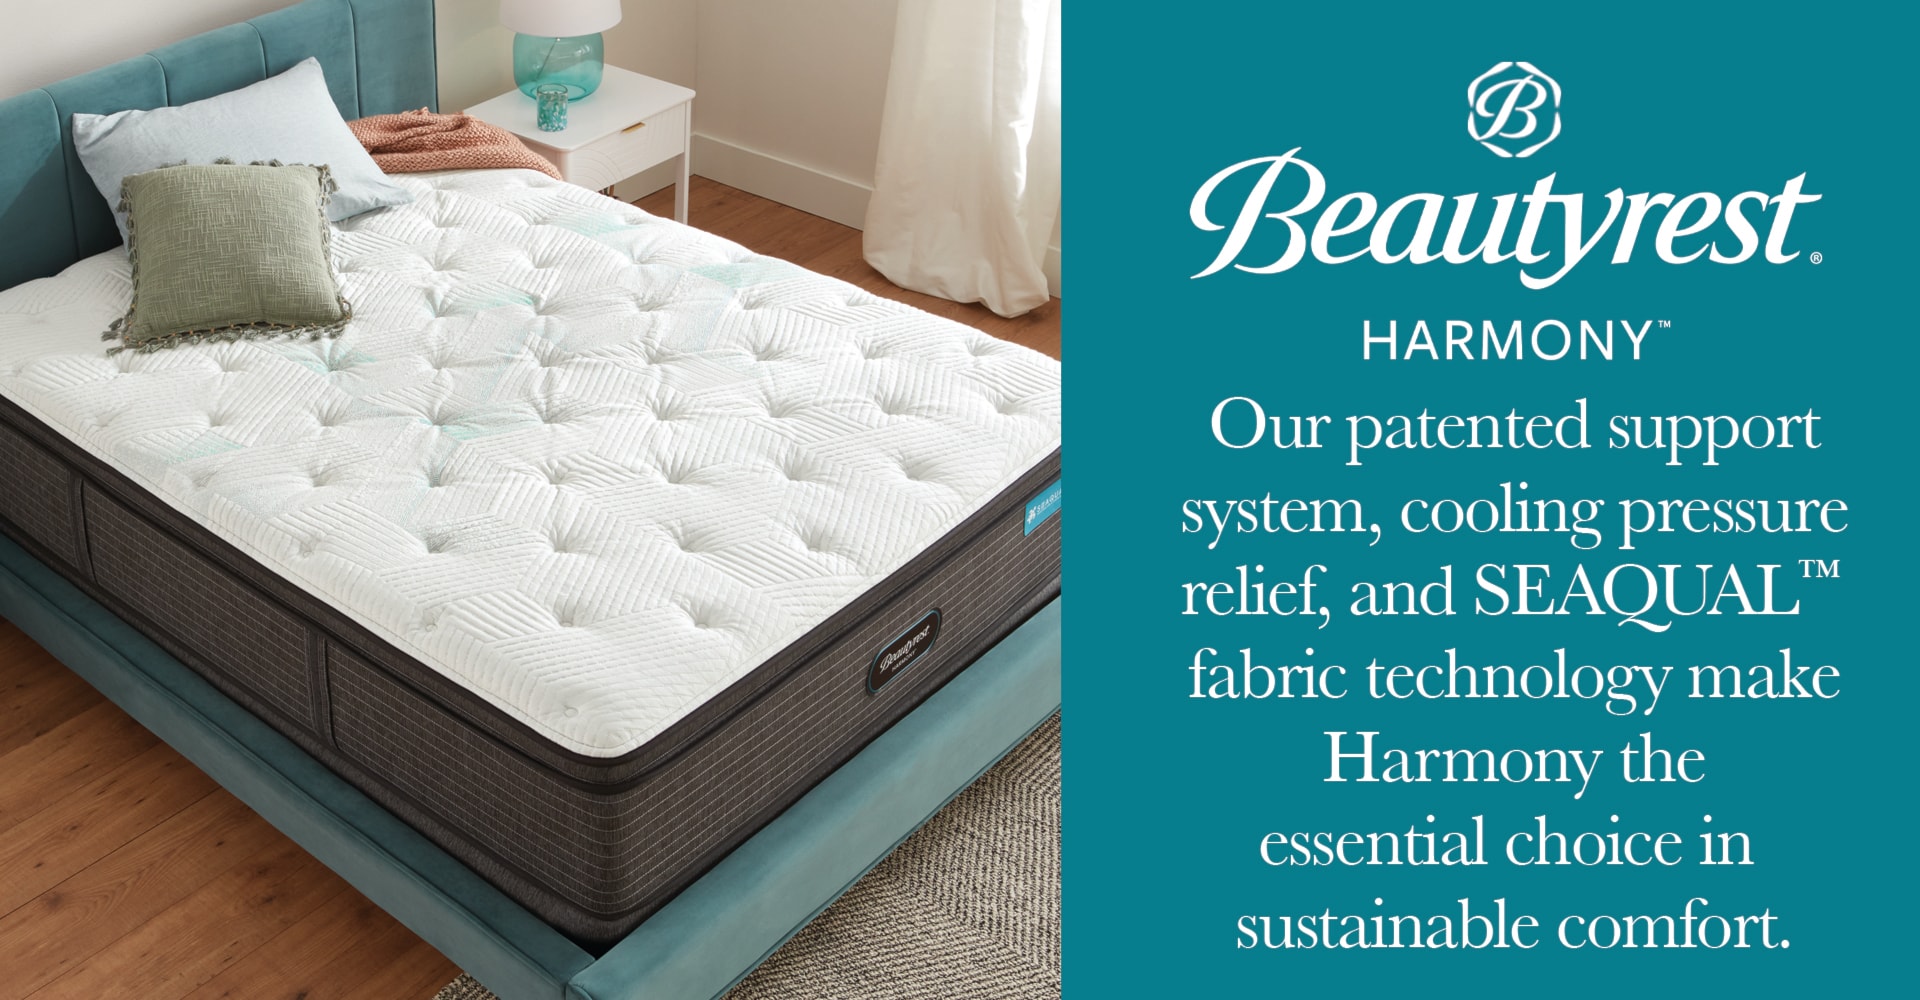 Beautyrest Harmony features new innovations in support, comfort, and cooling working together in harmony to unlock your best sleep